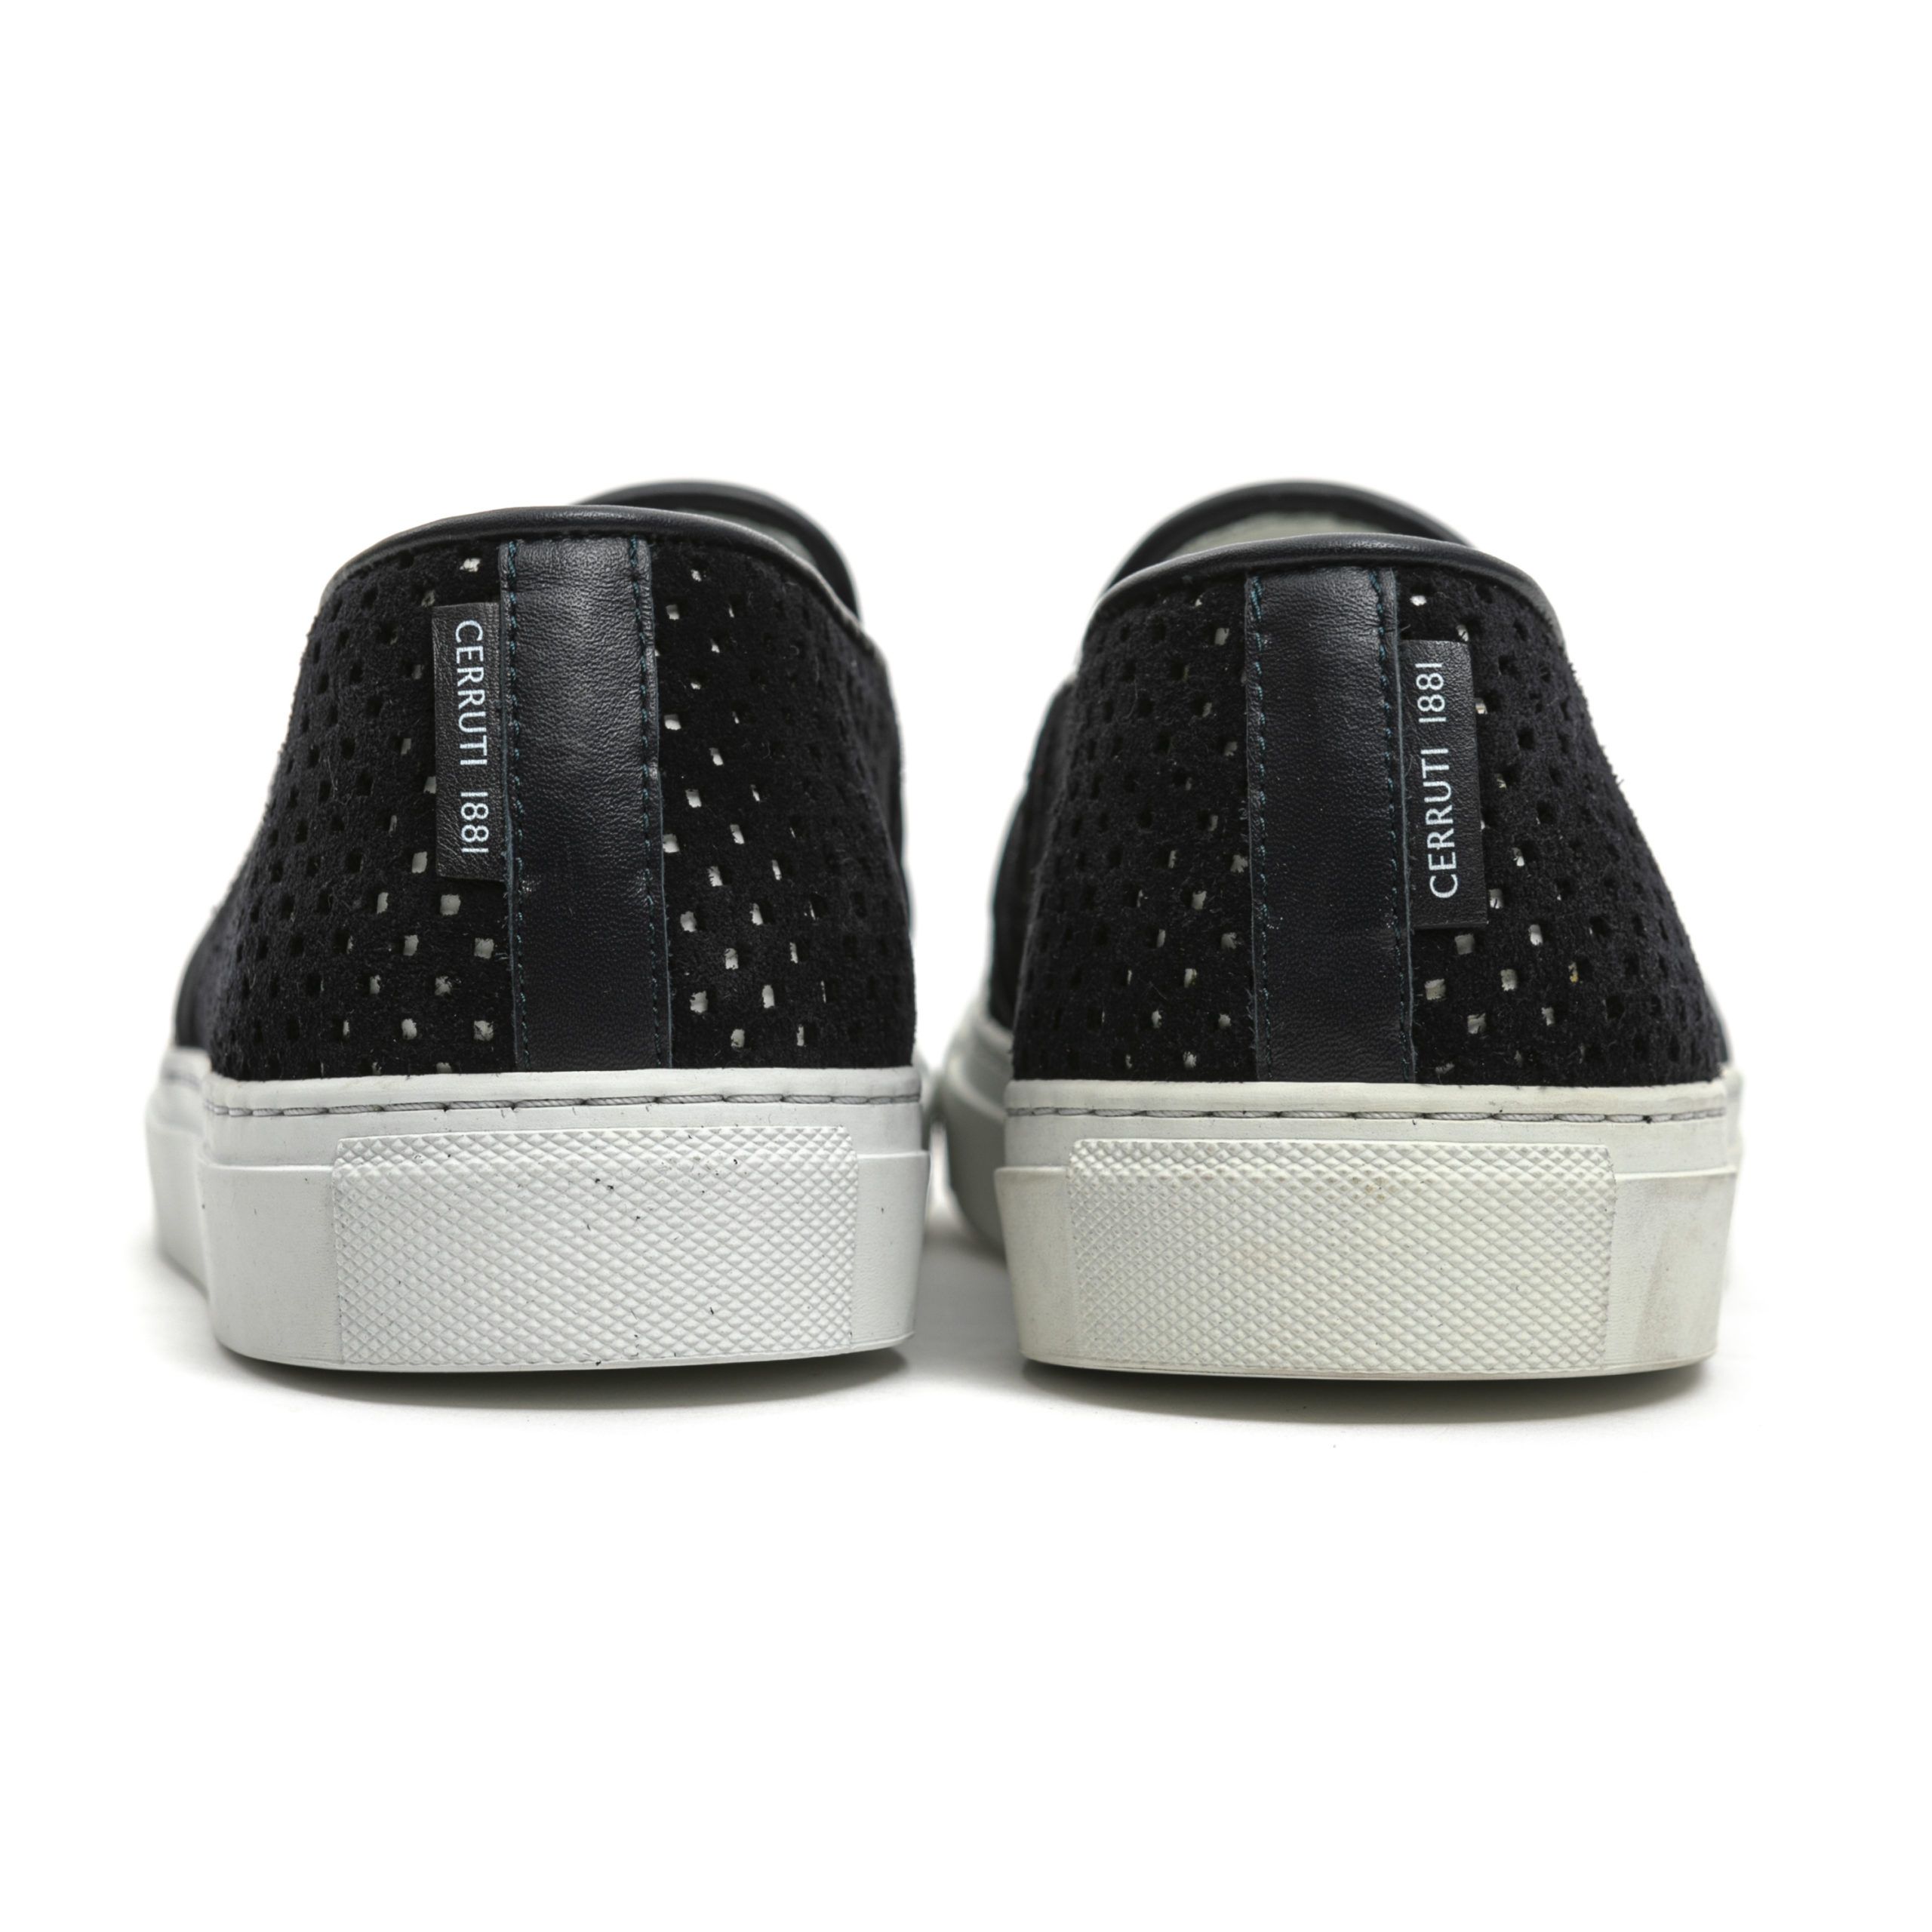 <p>Slip-on Shoes. Perforated Suede And Leather Edges. Rubber Sole</p>